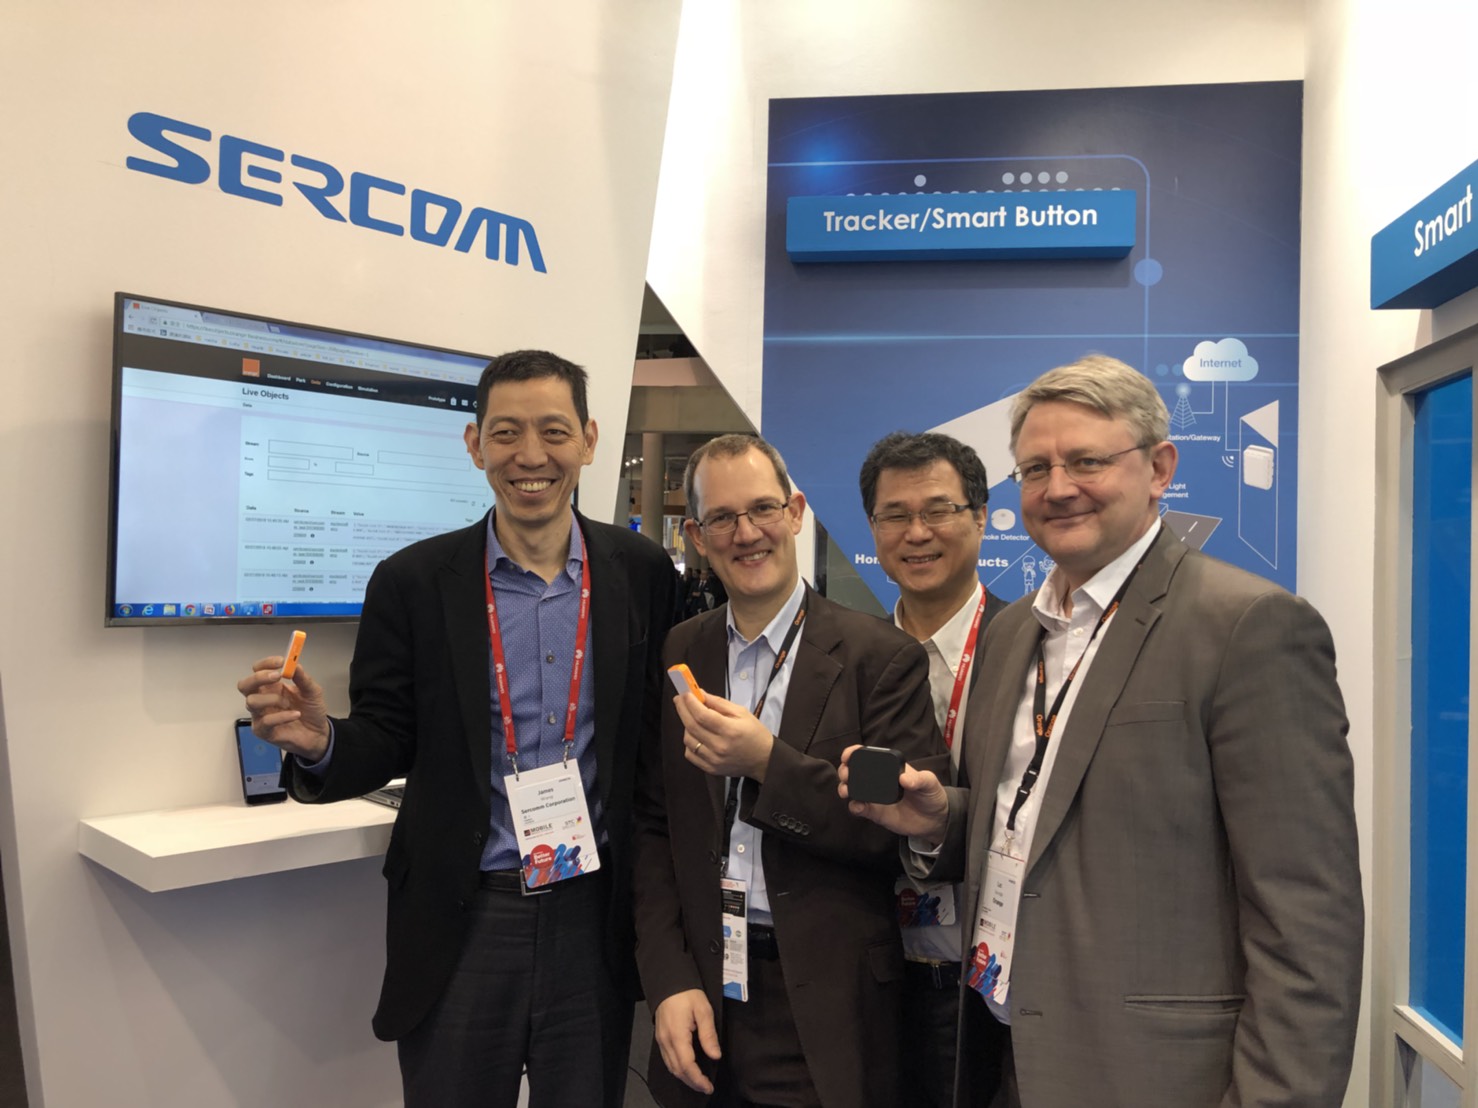 Sercomm’s new series of LTE-M IoT devices heralds another era of mobile IoT technology